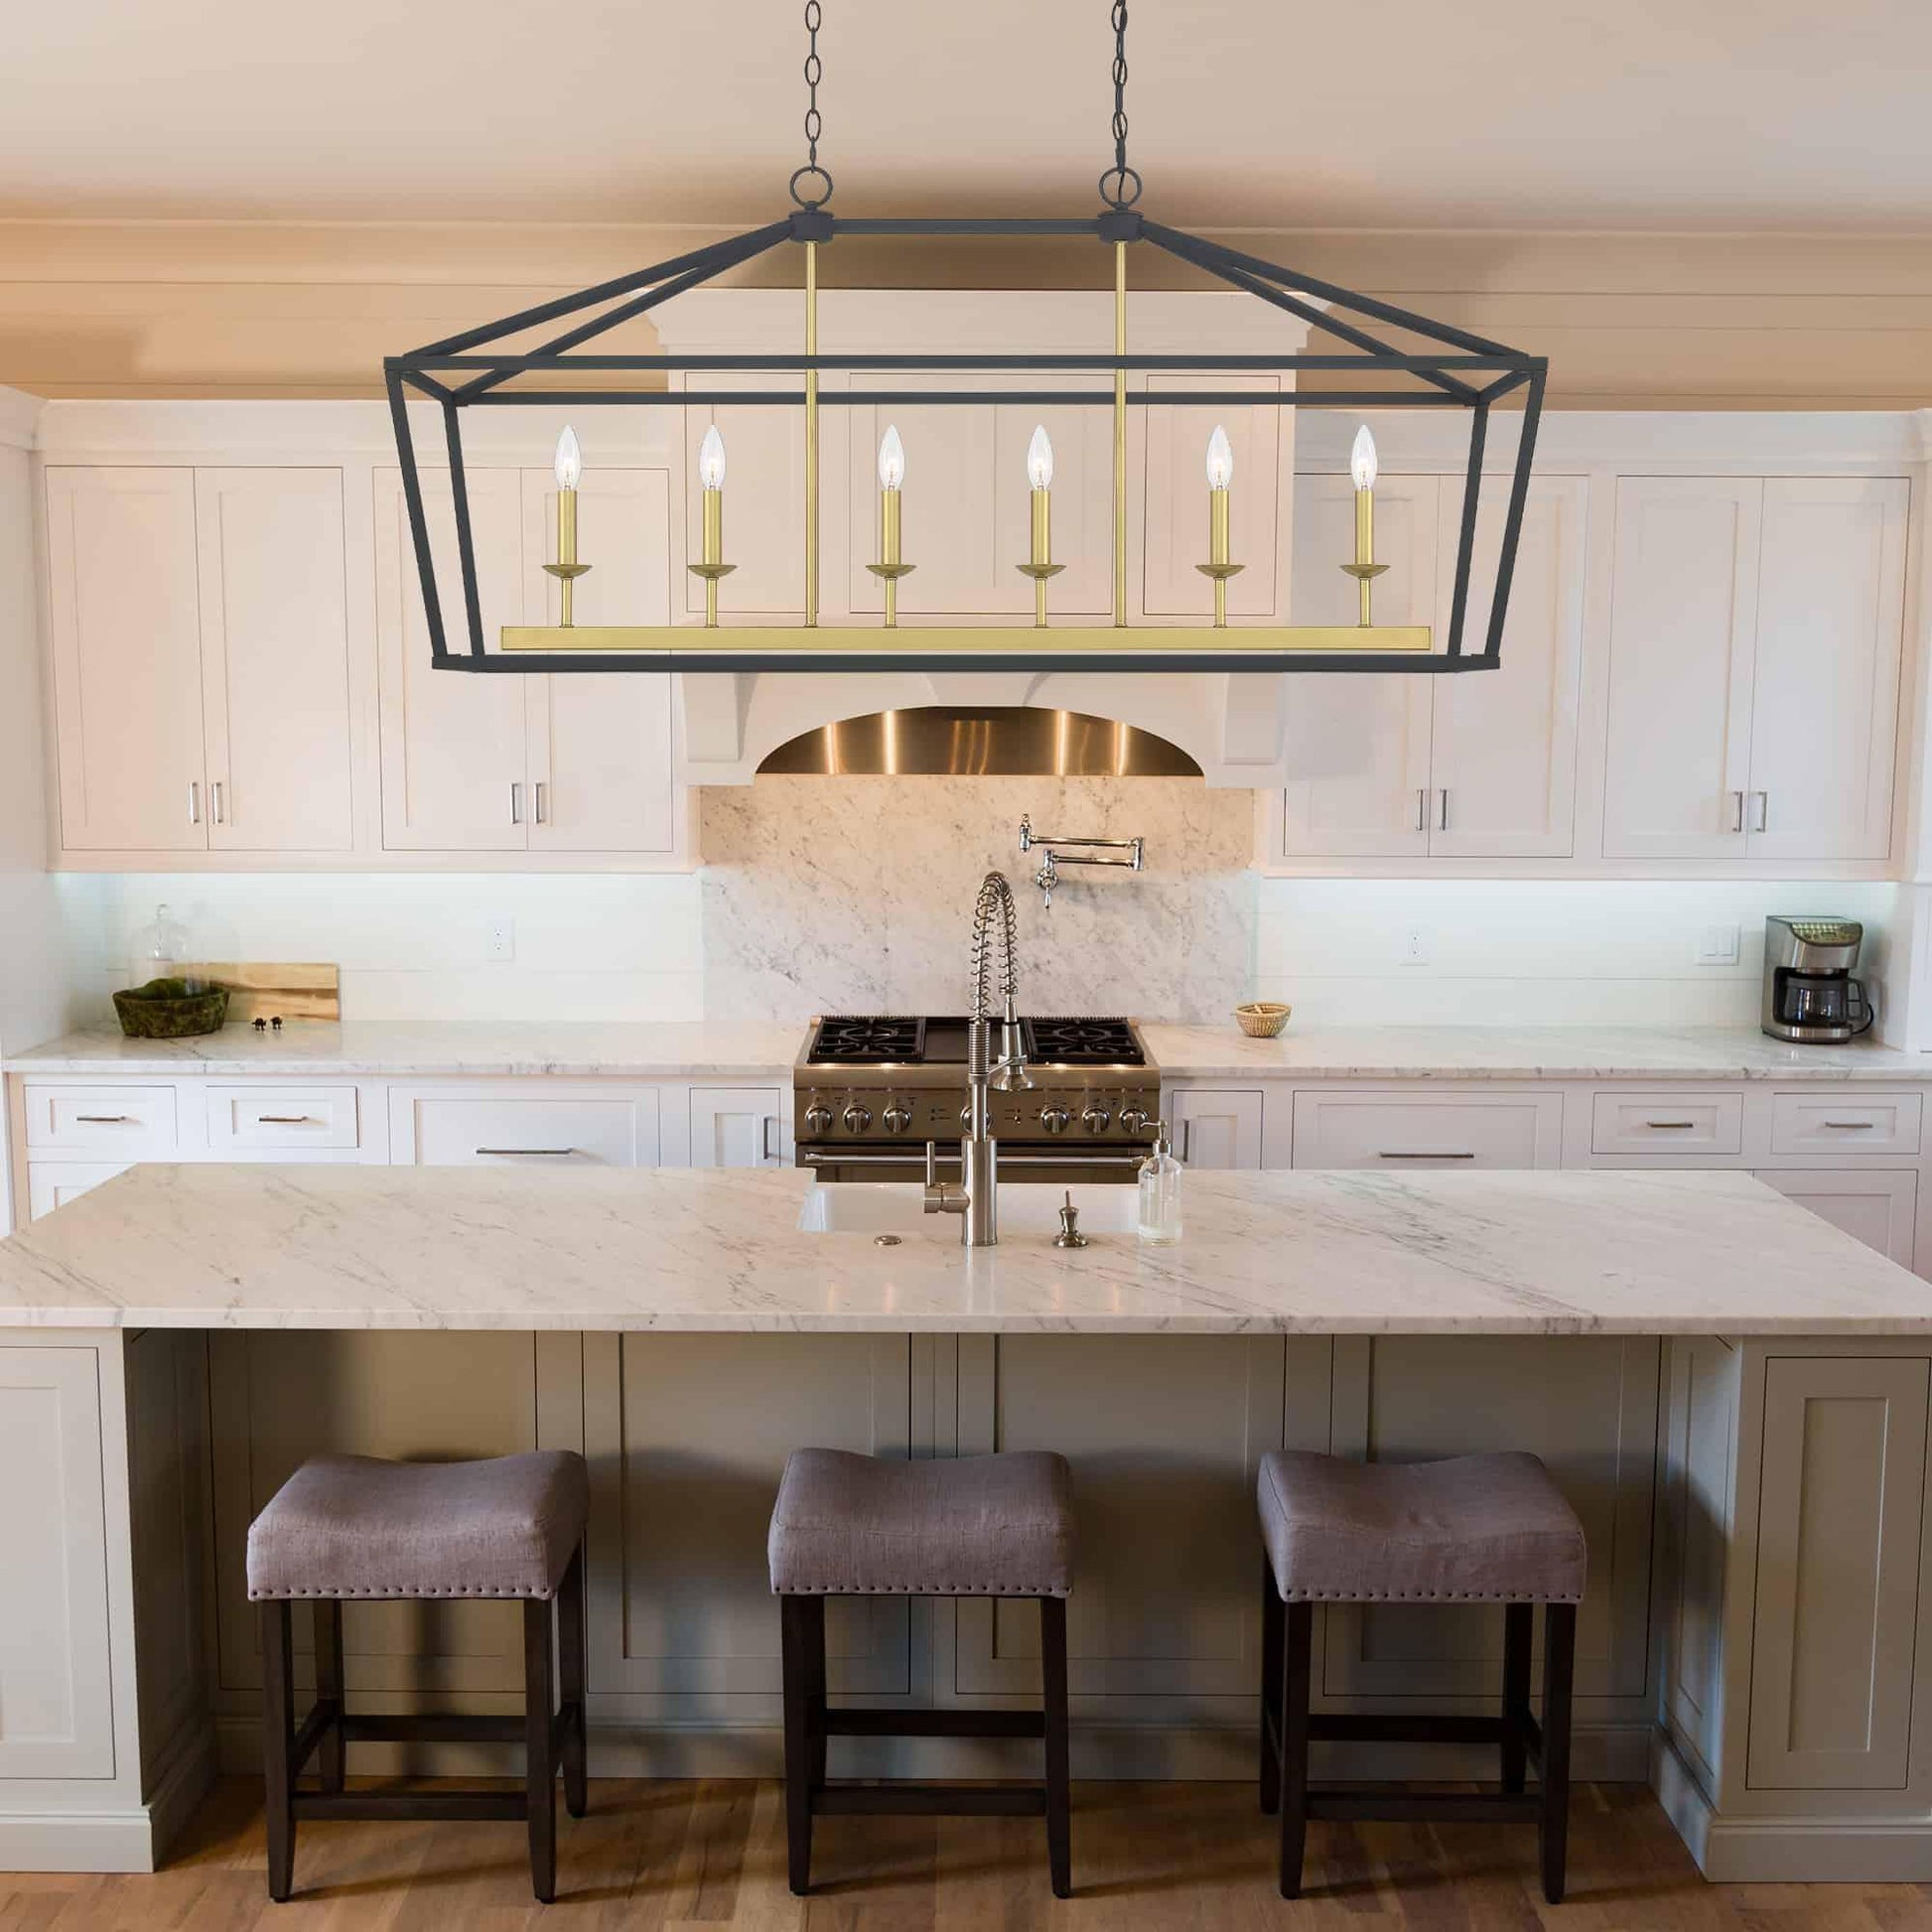 6 light linear kitchen island chandelier (1) by ACROMA